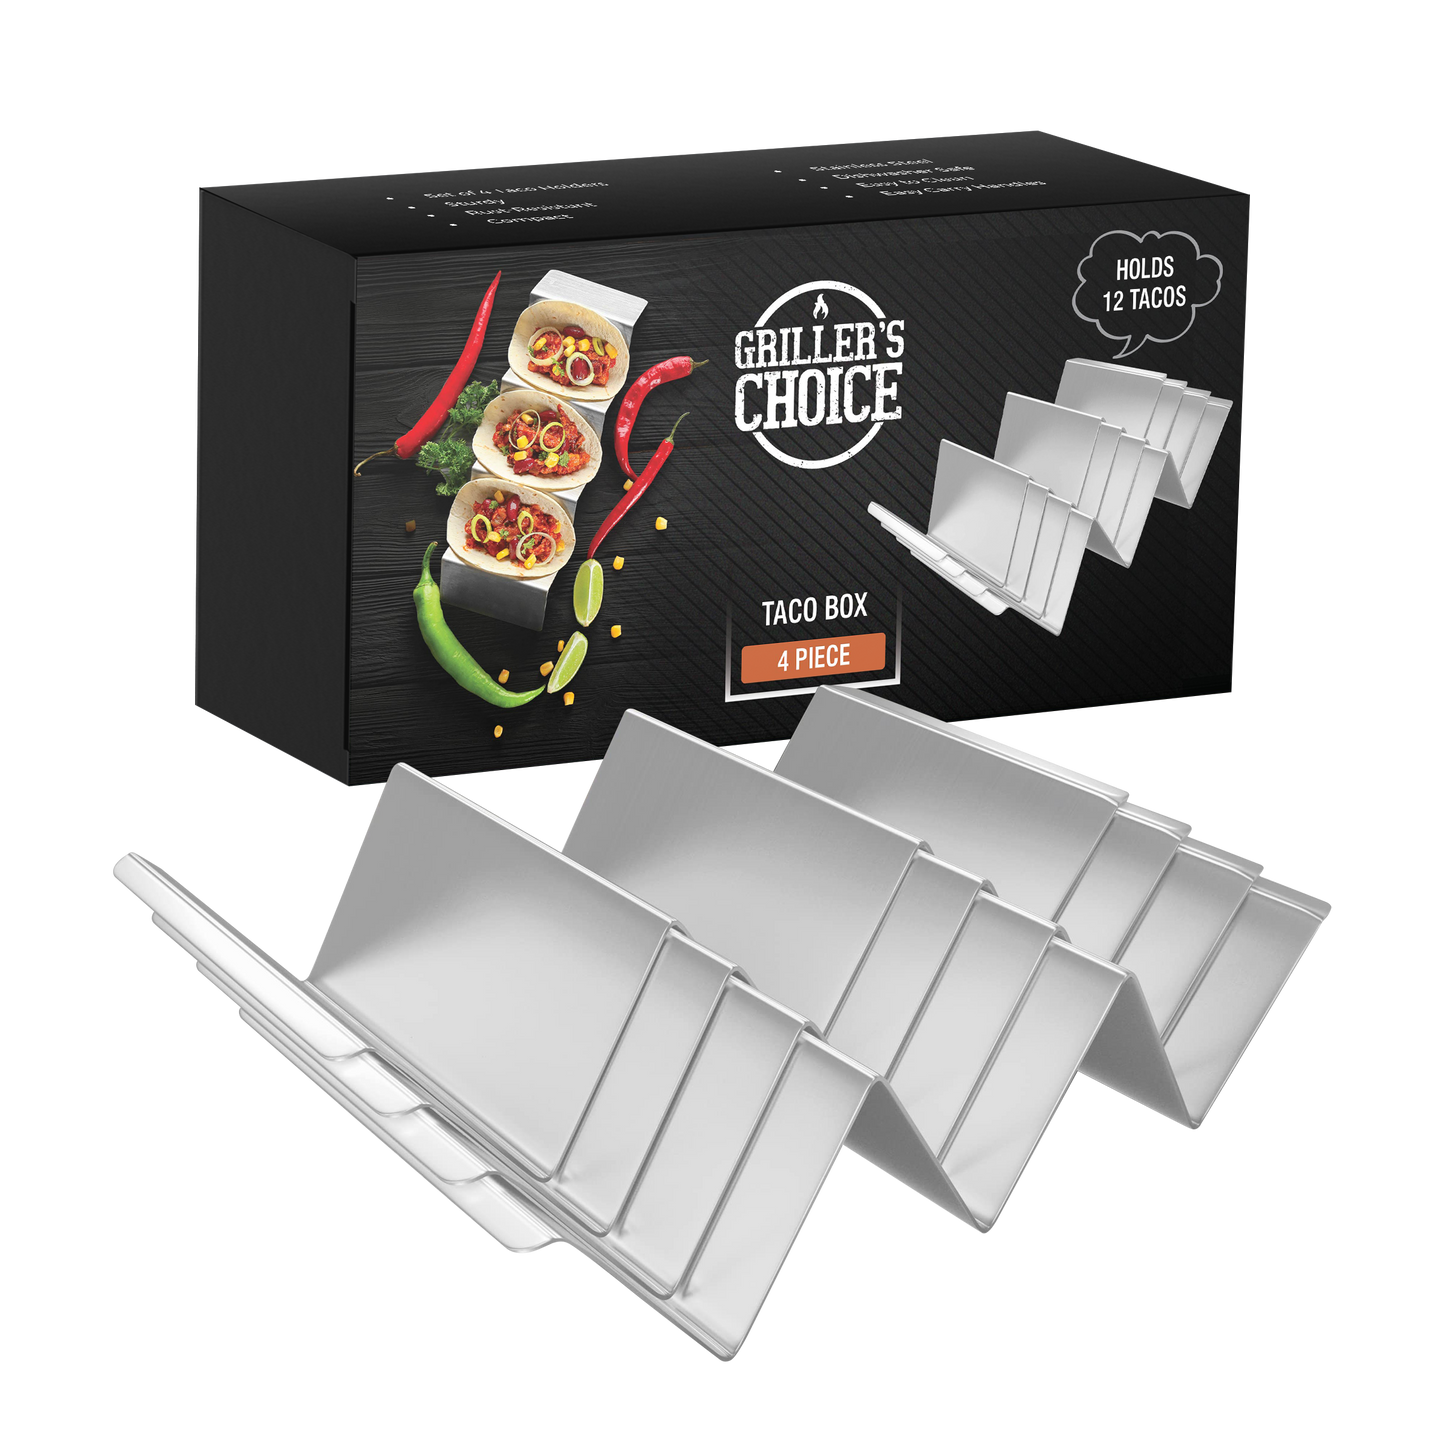 Griller's Choice Stainless Steel Taco Holder Set - 4 Pack Taco Shell Holder for 12 Tacos, Easy to Clean Taco Serving Platter, Perfect Taco Rack for Grillers and Griddle Users